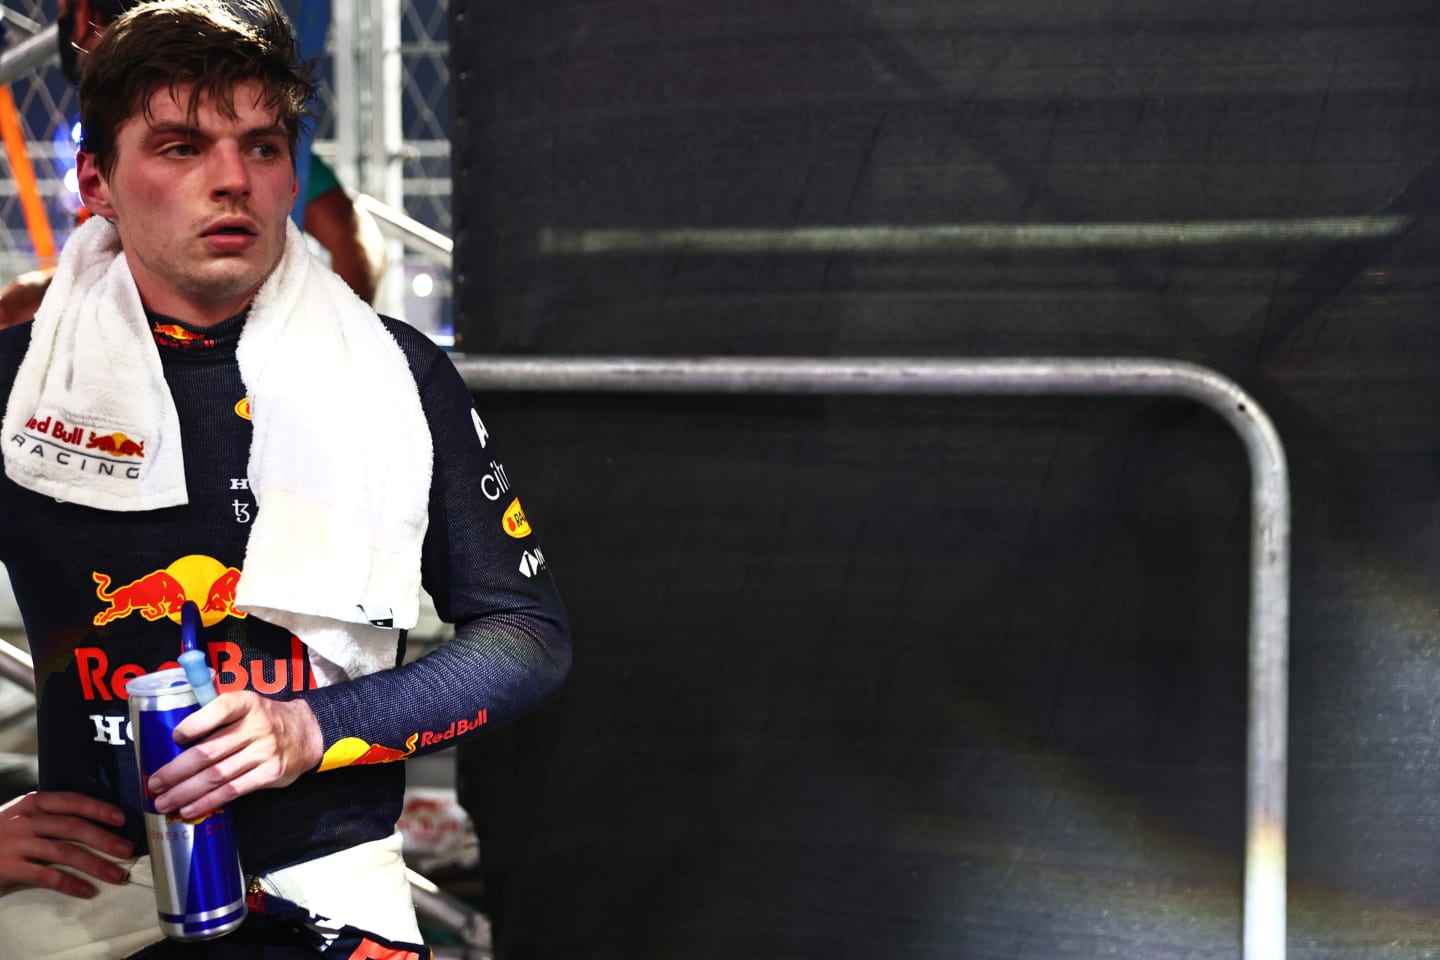 JEDDAH, SAUDI ARABIA - DECEMBER 05: Second placed Max Verstappen of Netherlands and Red Bull Racing looks on in parc ferme during the F1 Grand Prix of Saudi Arabia at Jeddah Corniche Circuit on December 05, 2021 in Jeddah, Saudi Arabia. (Photo by Mark Thompson/Getty Images)